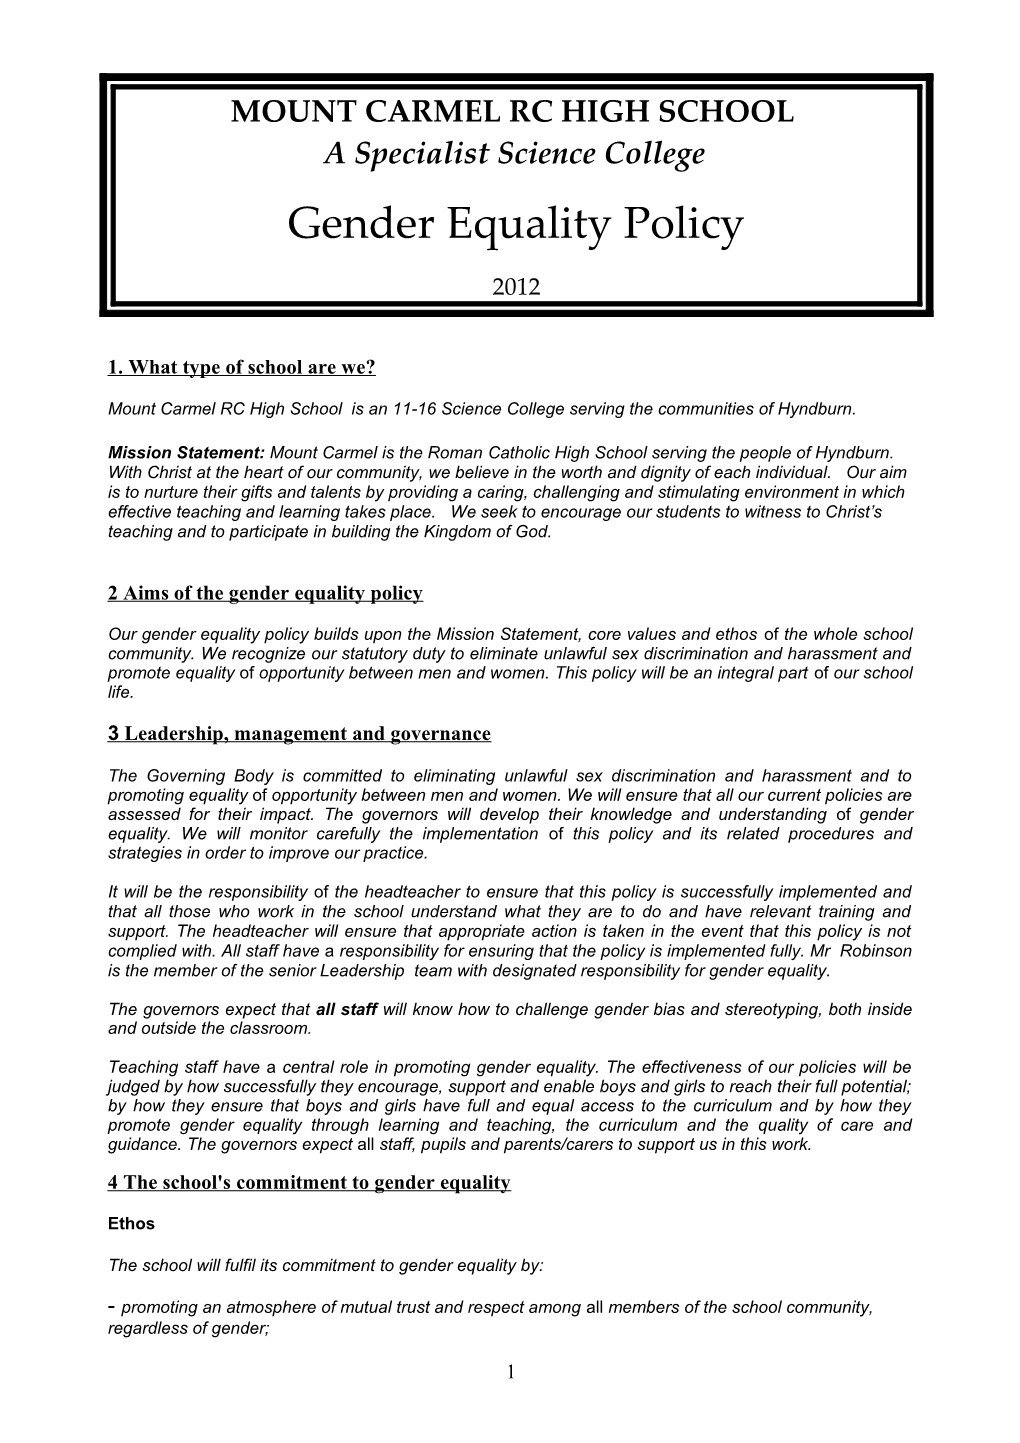 2 Aims of the Gender Equality Policy